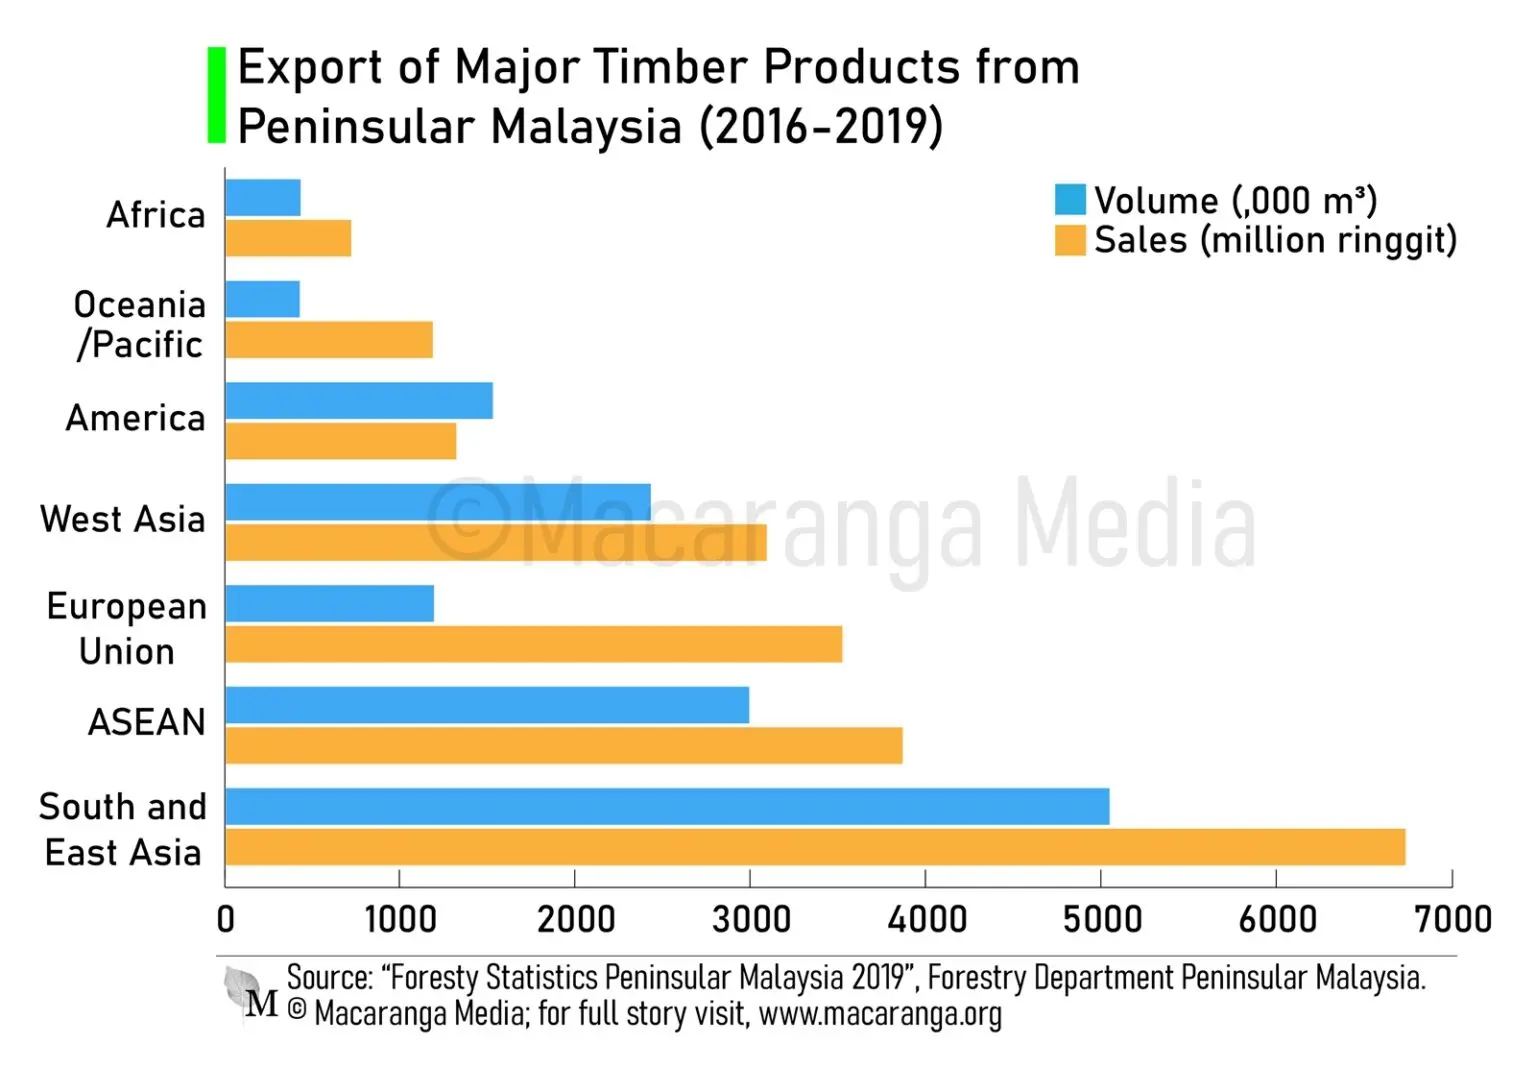 Figure 1: Export volume and sales of major timber products from Peninsular Malaysia.